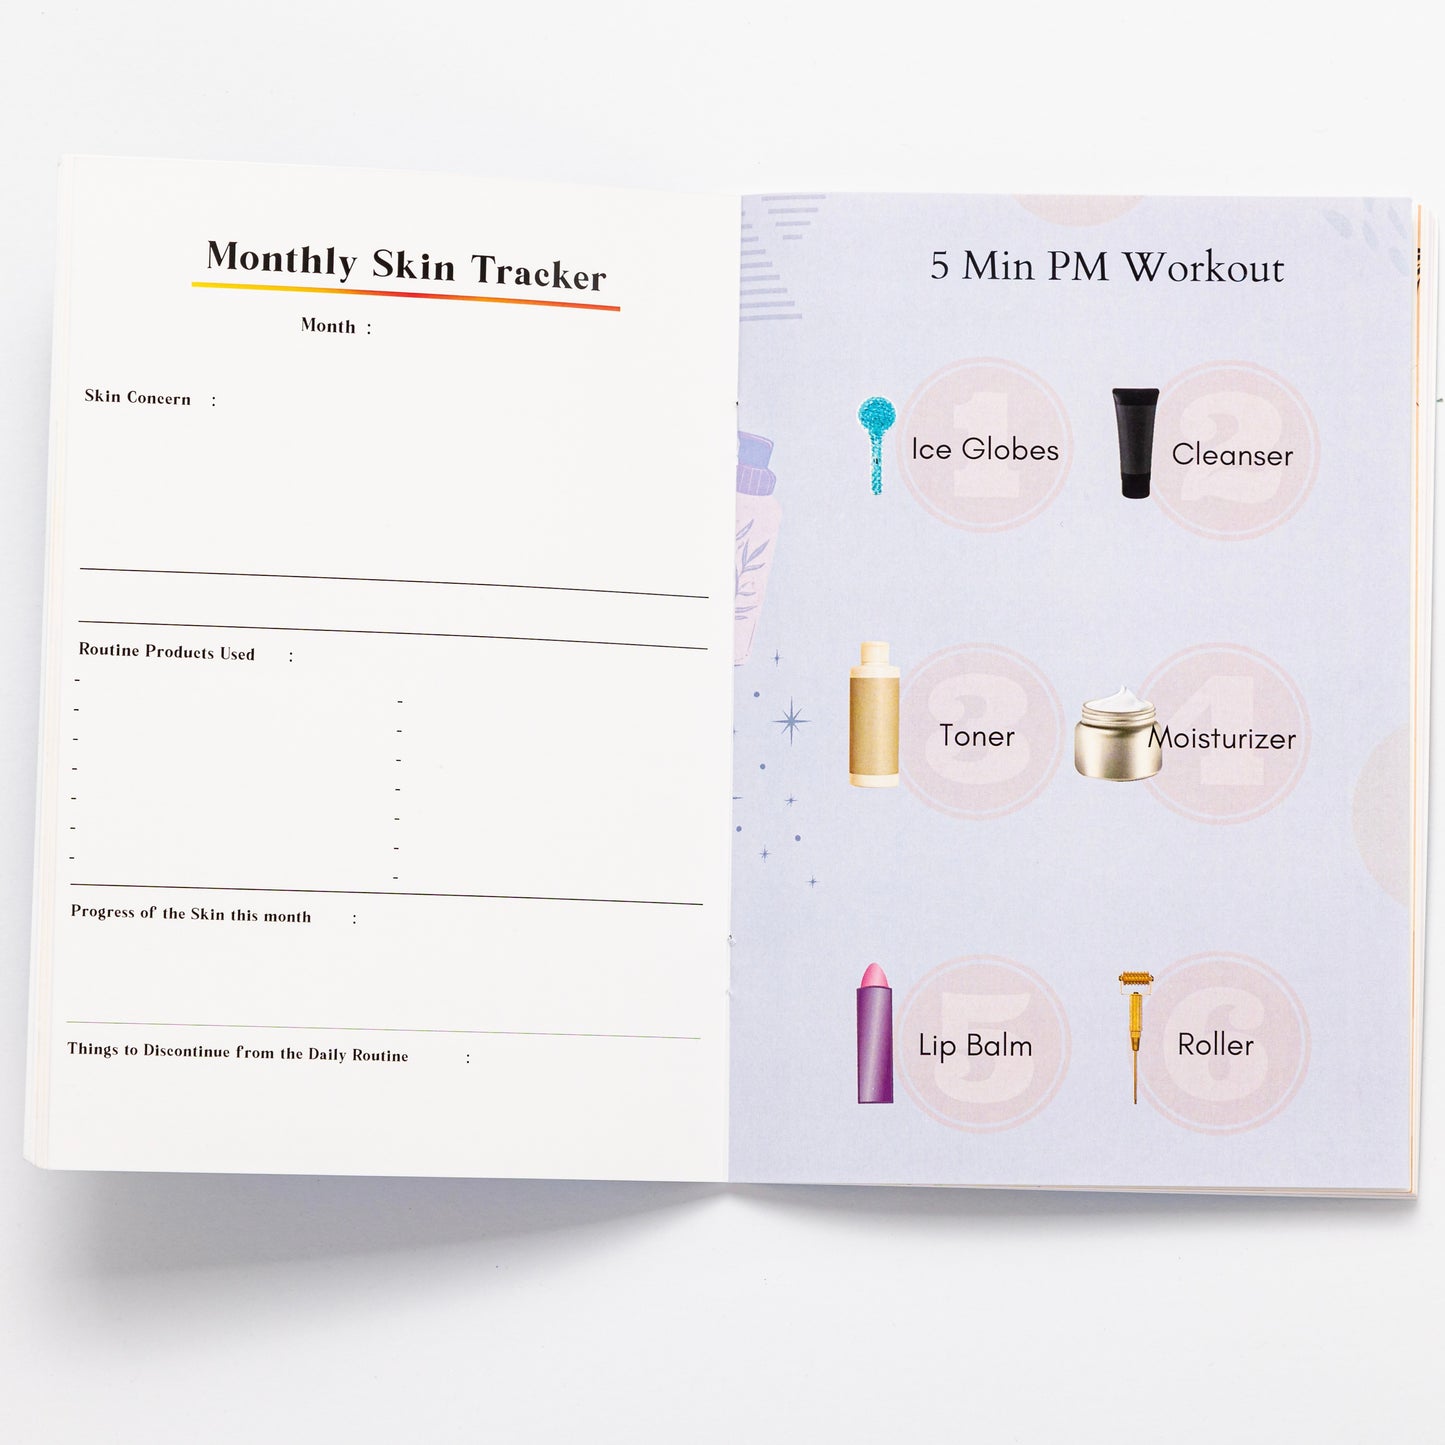 The Skincare Journal